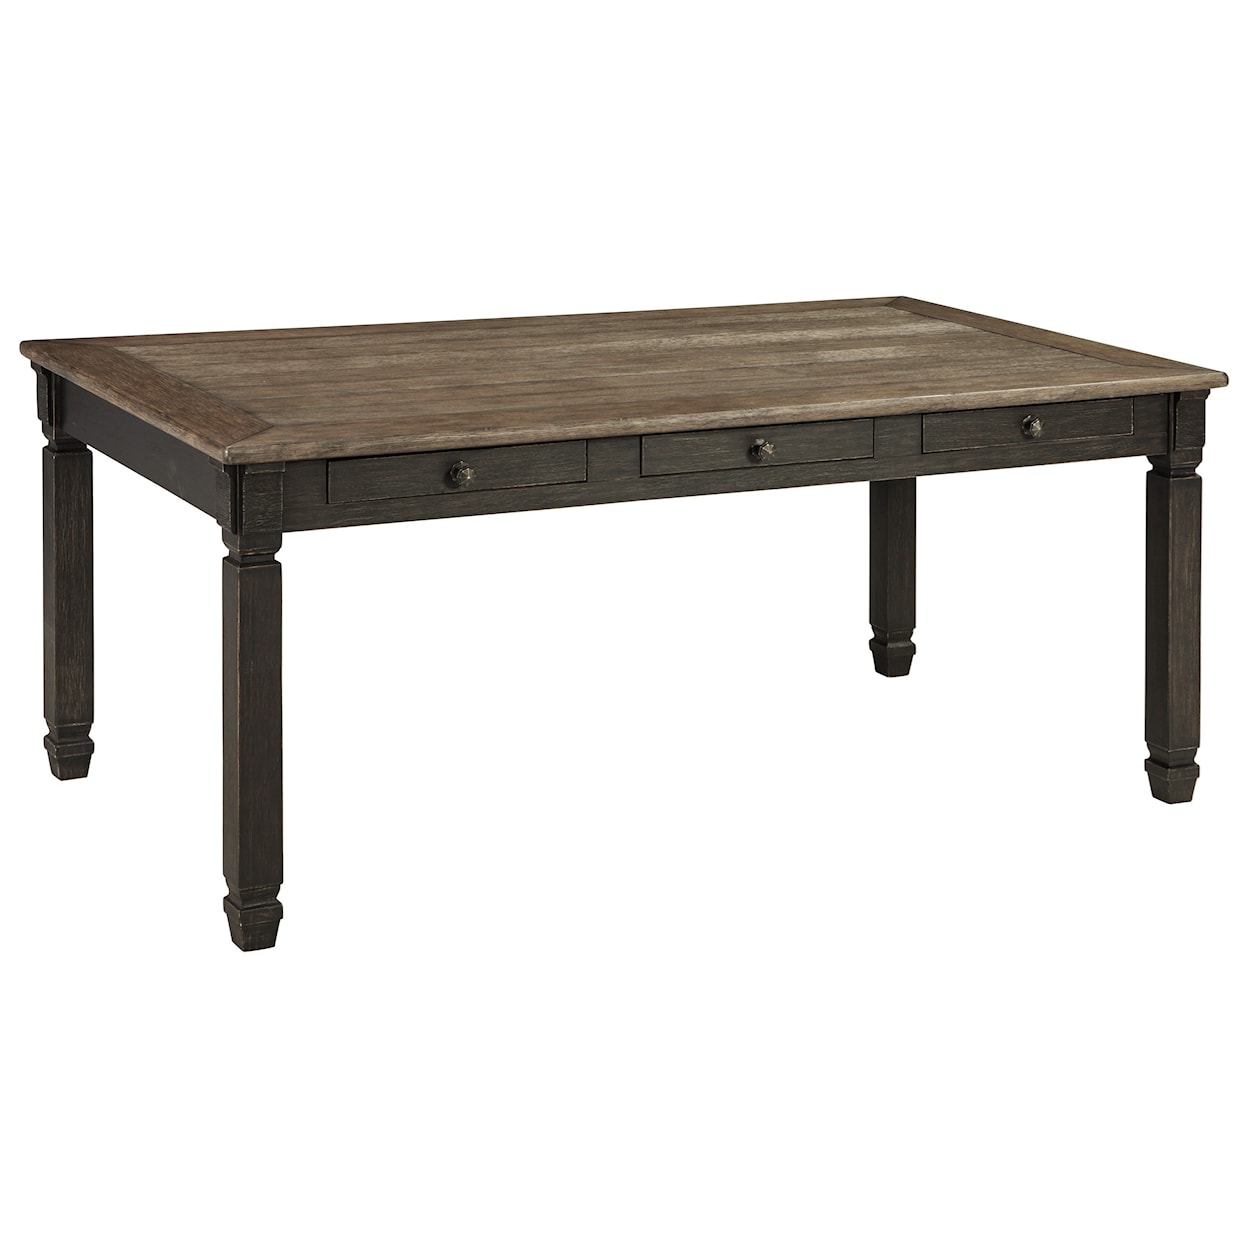 Signature Design by Ashley Tyler Creek Rectangular Dining Room Table